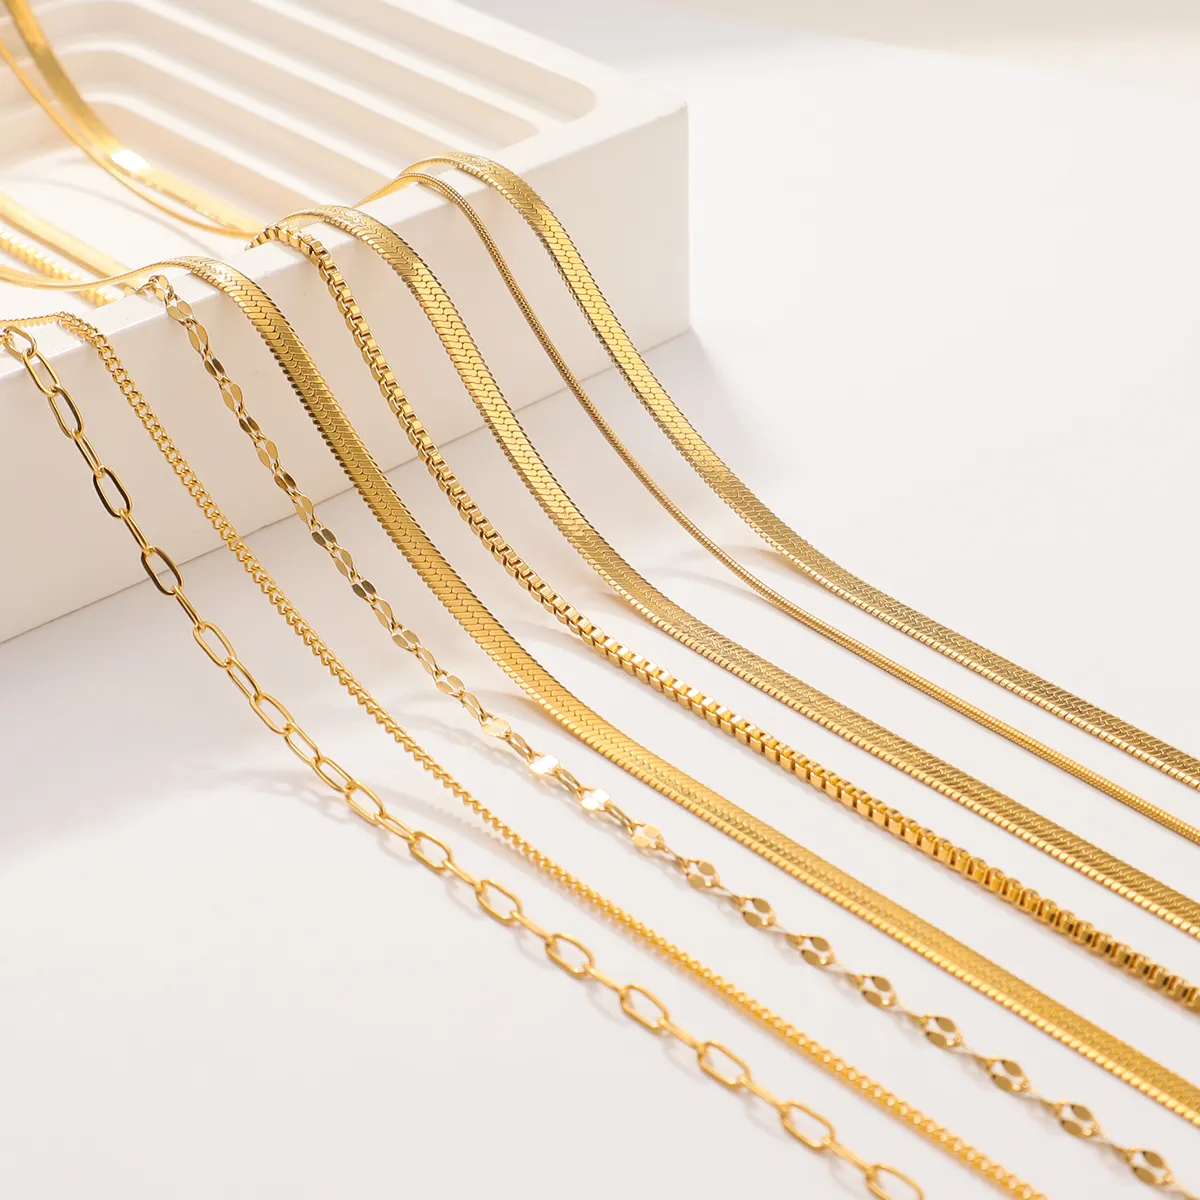 Minimalist 18k Gold Plated Double Layered Herringbone Necklaces Women Jewelry Stainless Steel Snake Chain Choker Necklace